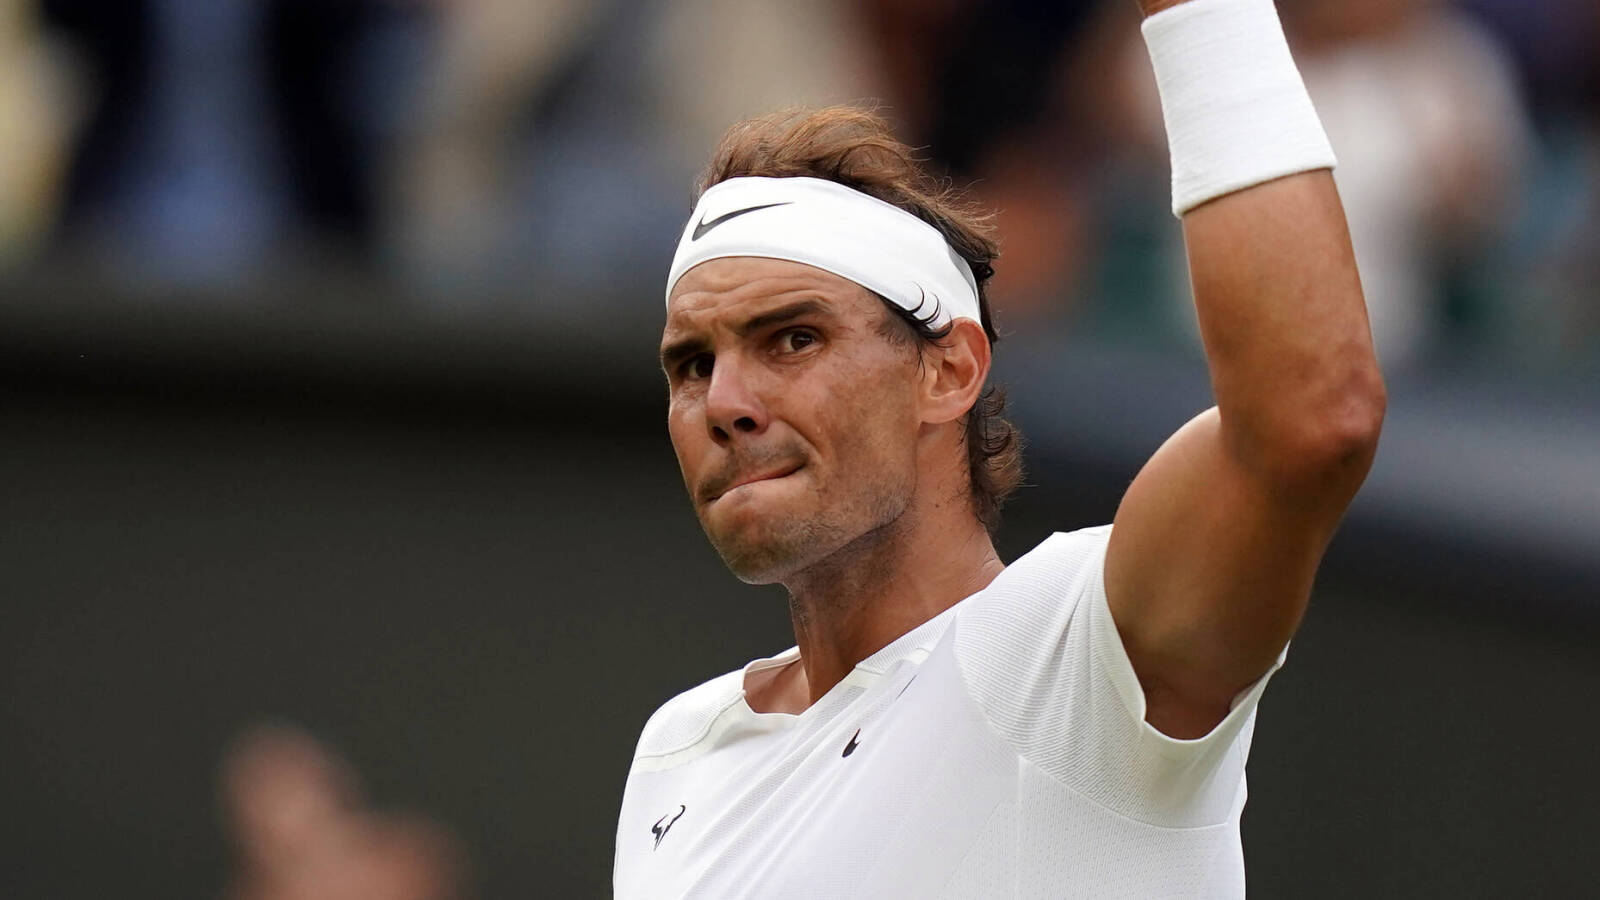 'I don’t hide the reality,' Rafael Nadal Academy does not look to soften the blows of professional tennis, as chief Toni Nadal makes clear